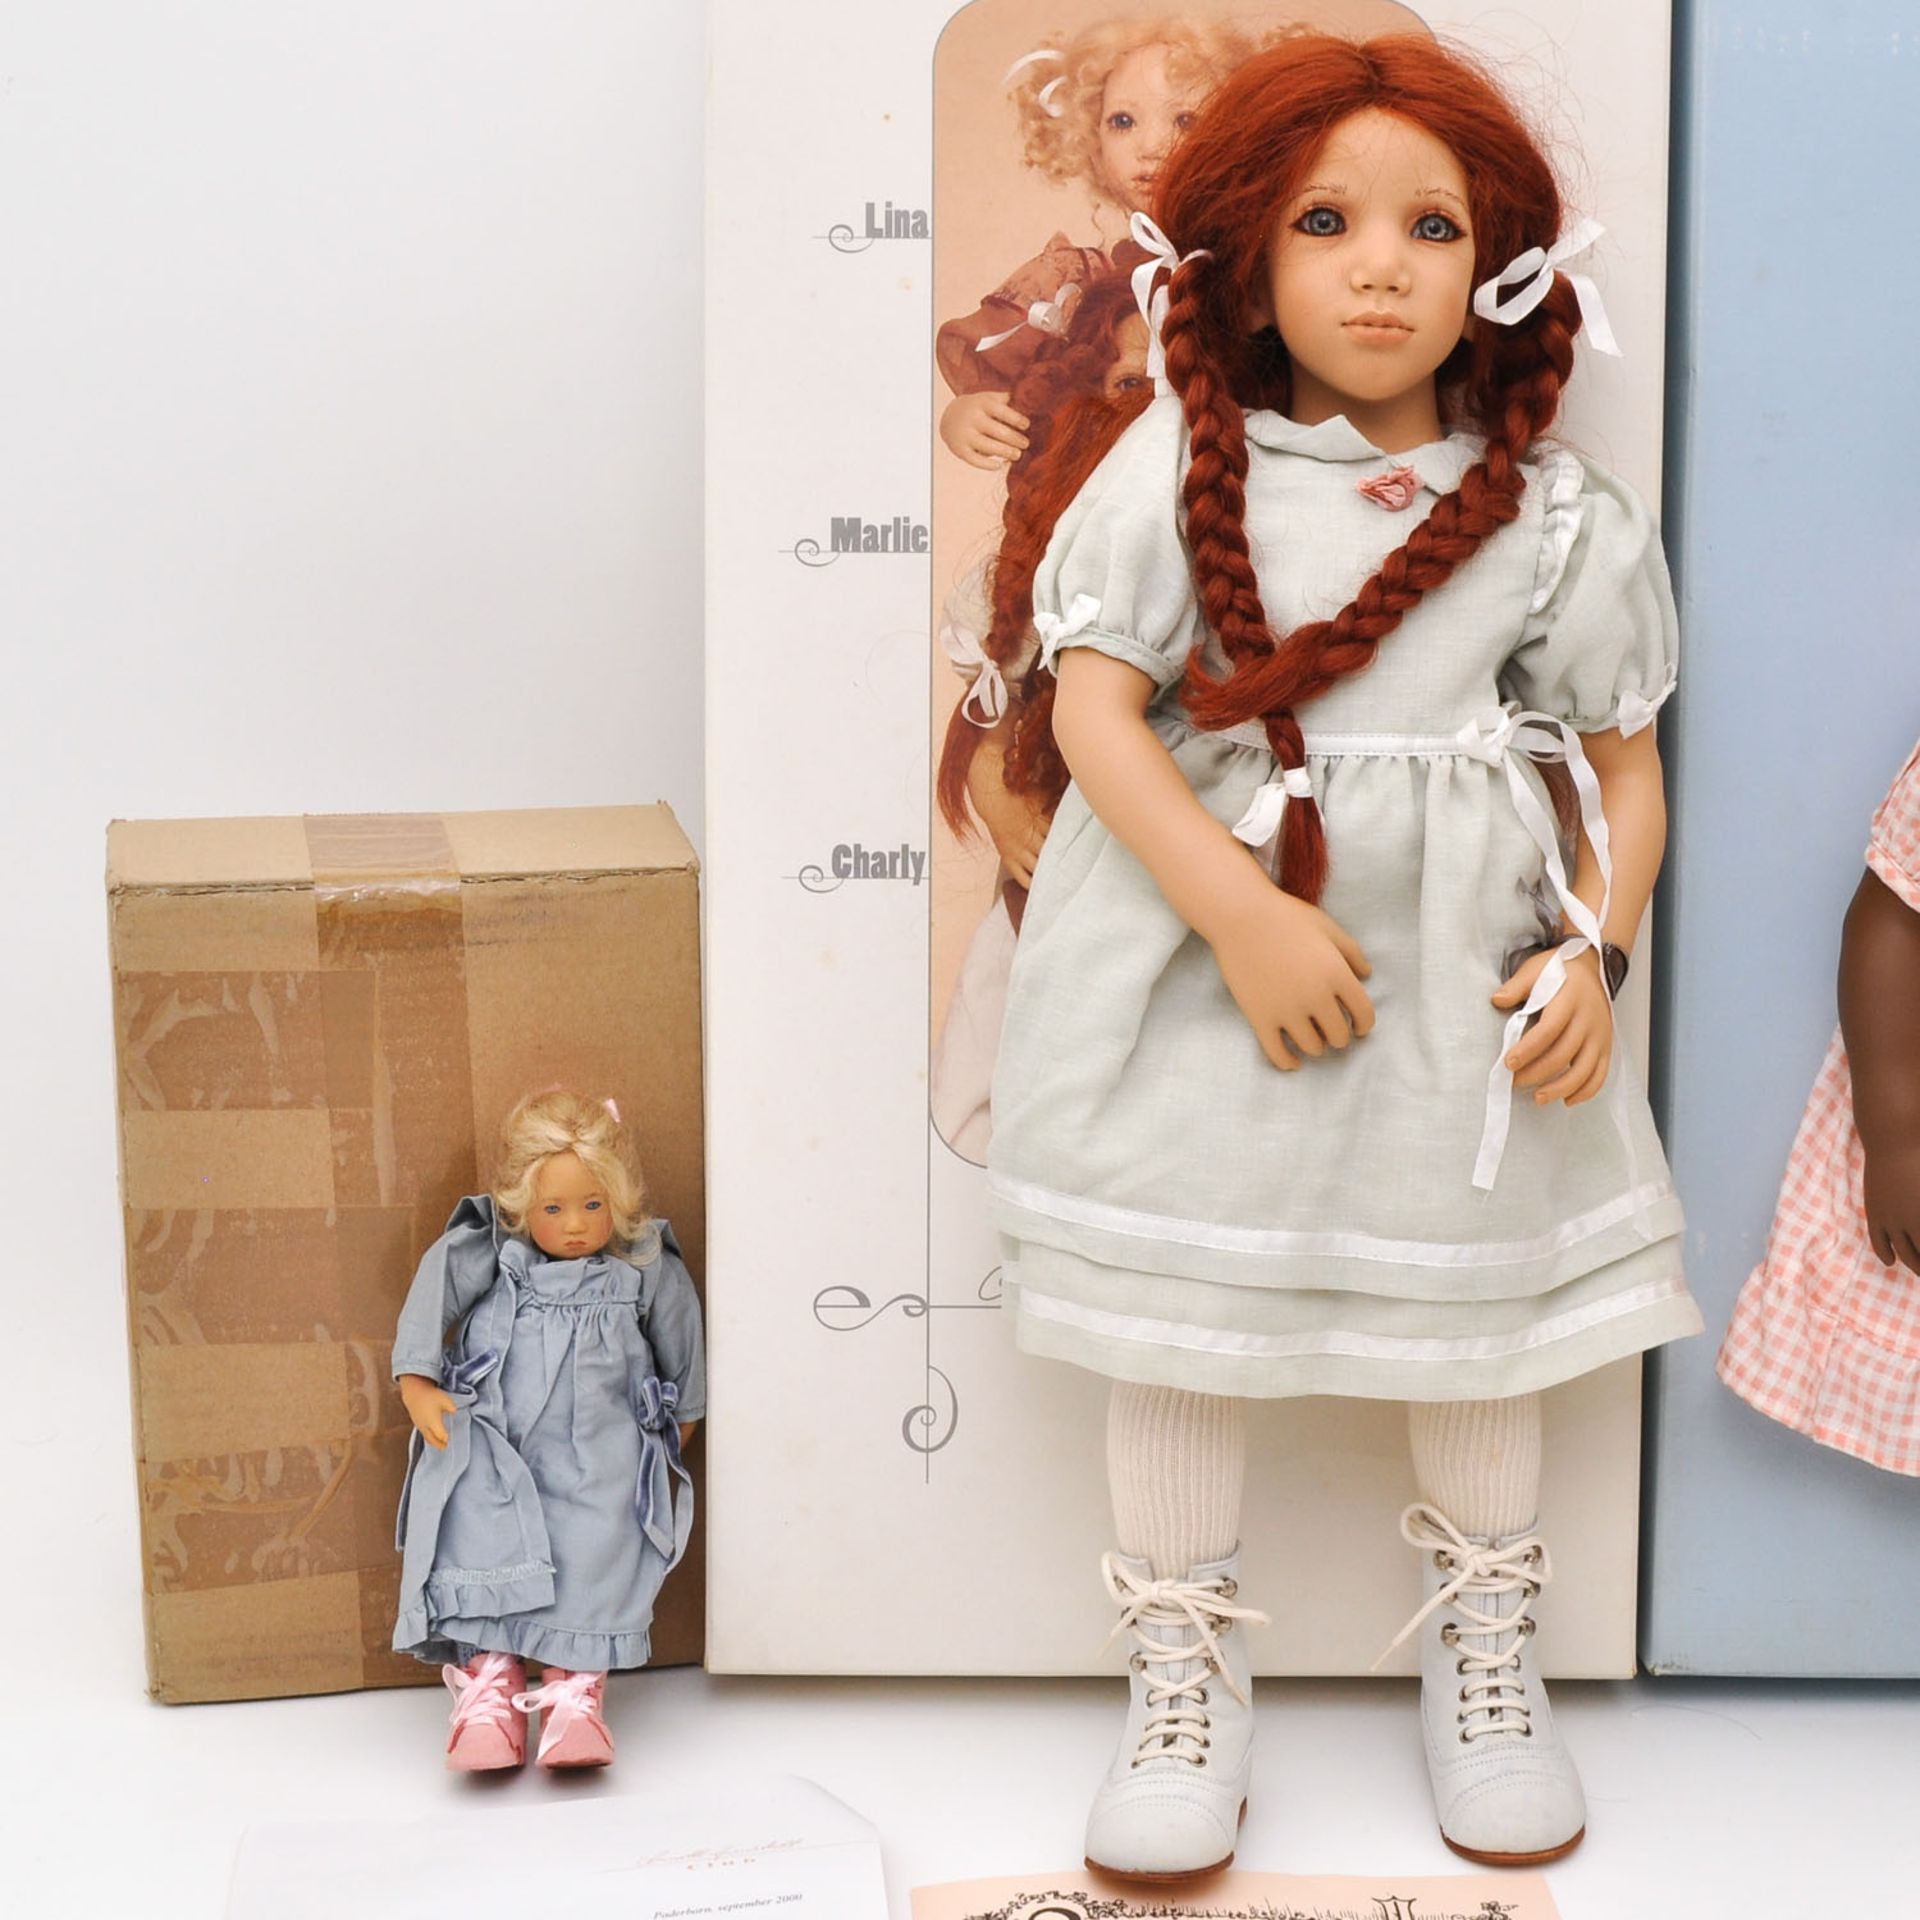 A Collection of 4 Annette Himstedt Dolls - Image 4 of 5